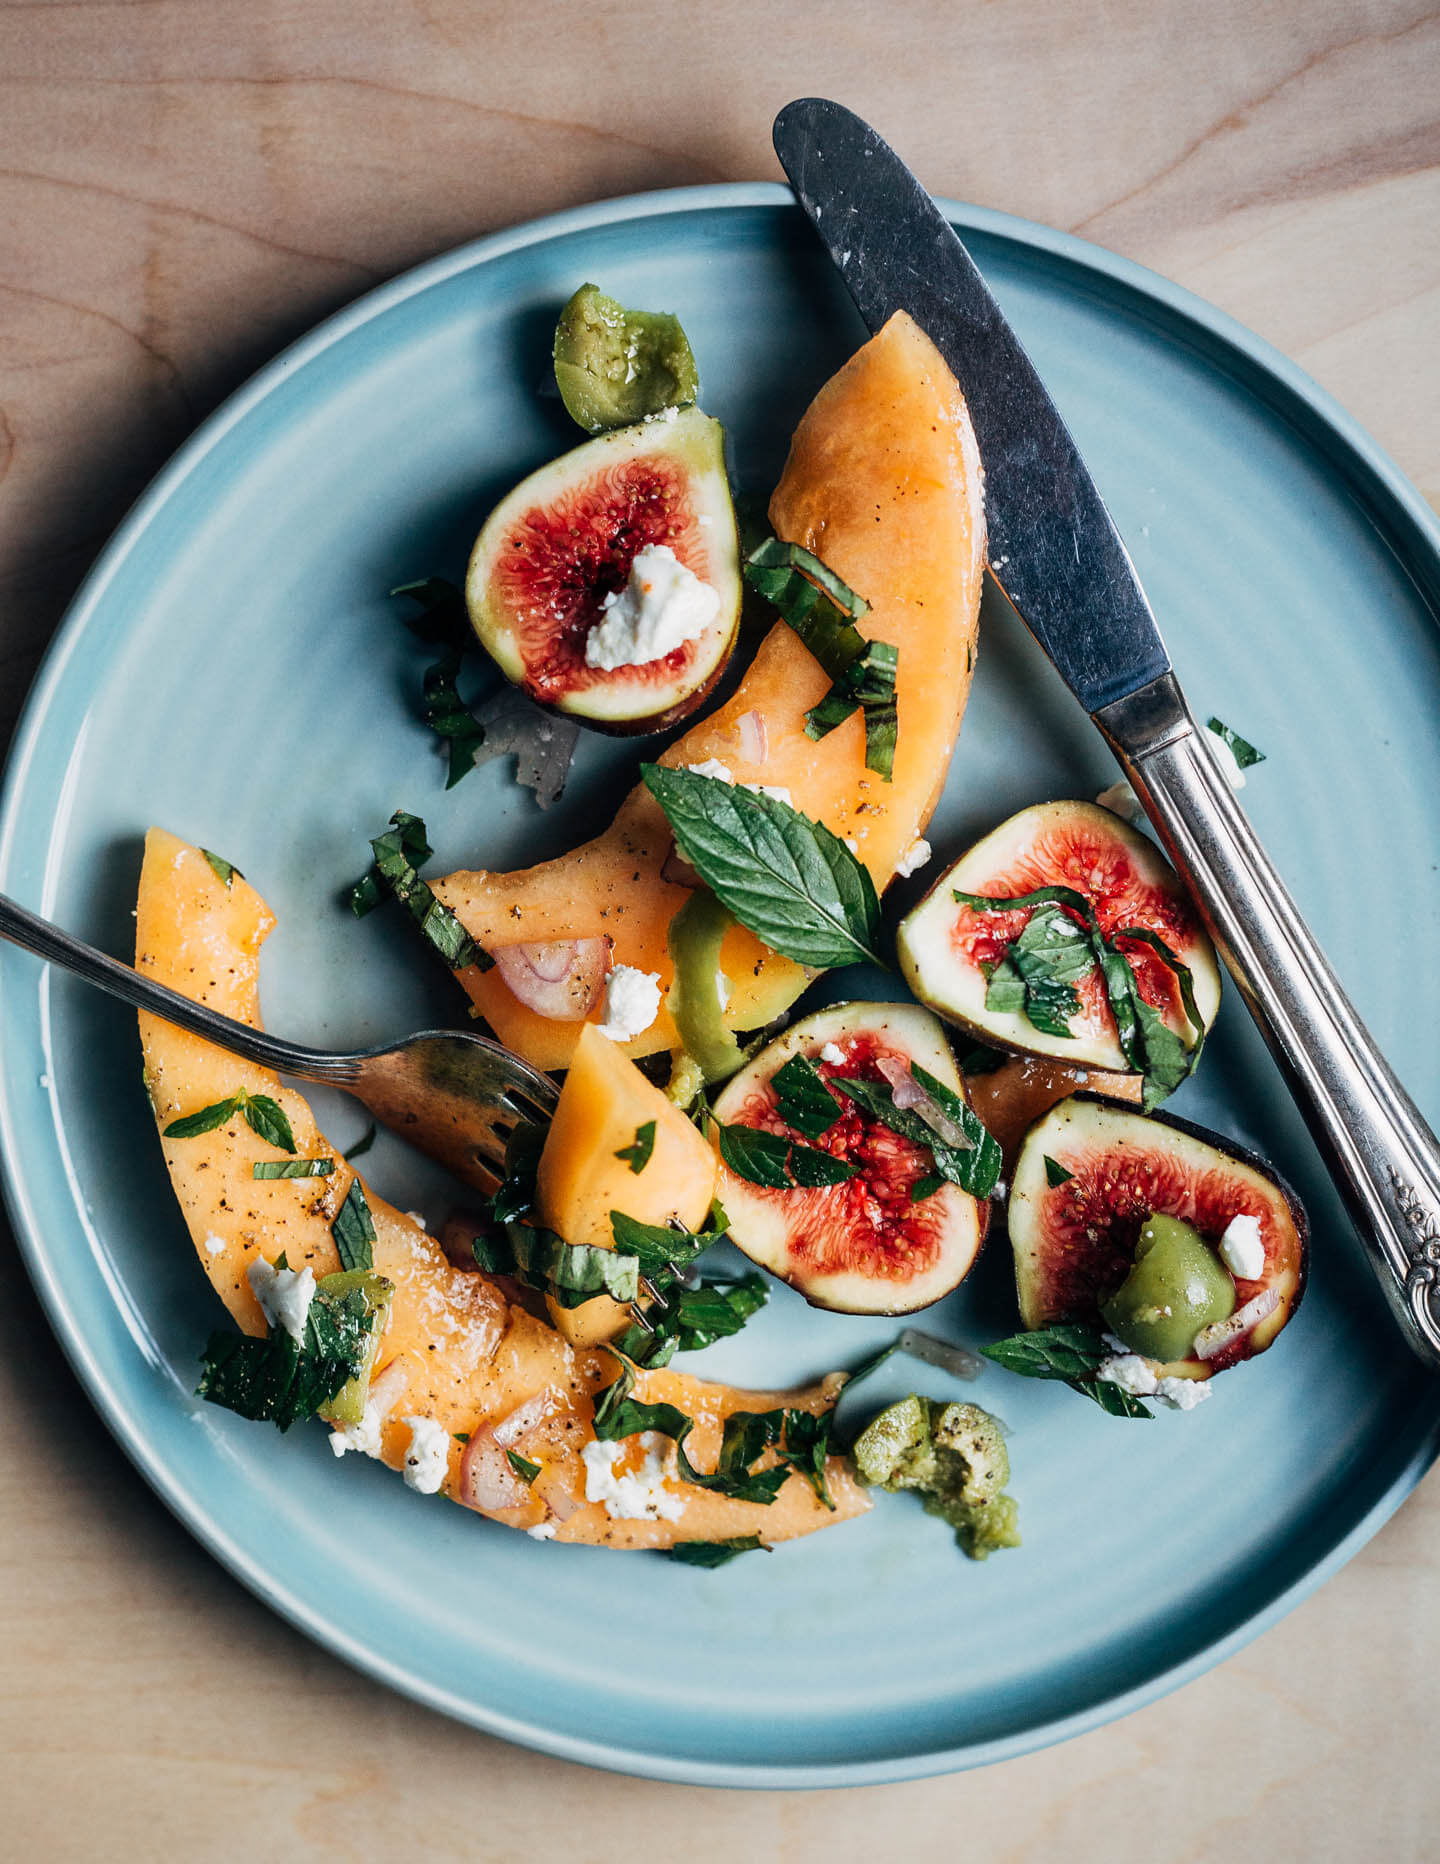 A plate with cantaloupe wedges, figs, feta, and herbs. 